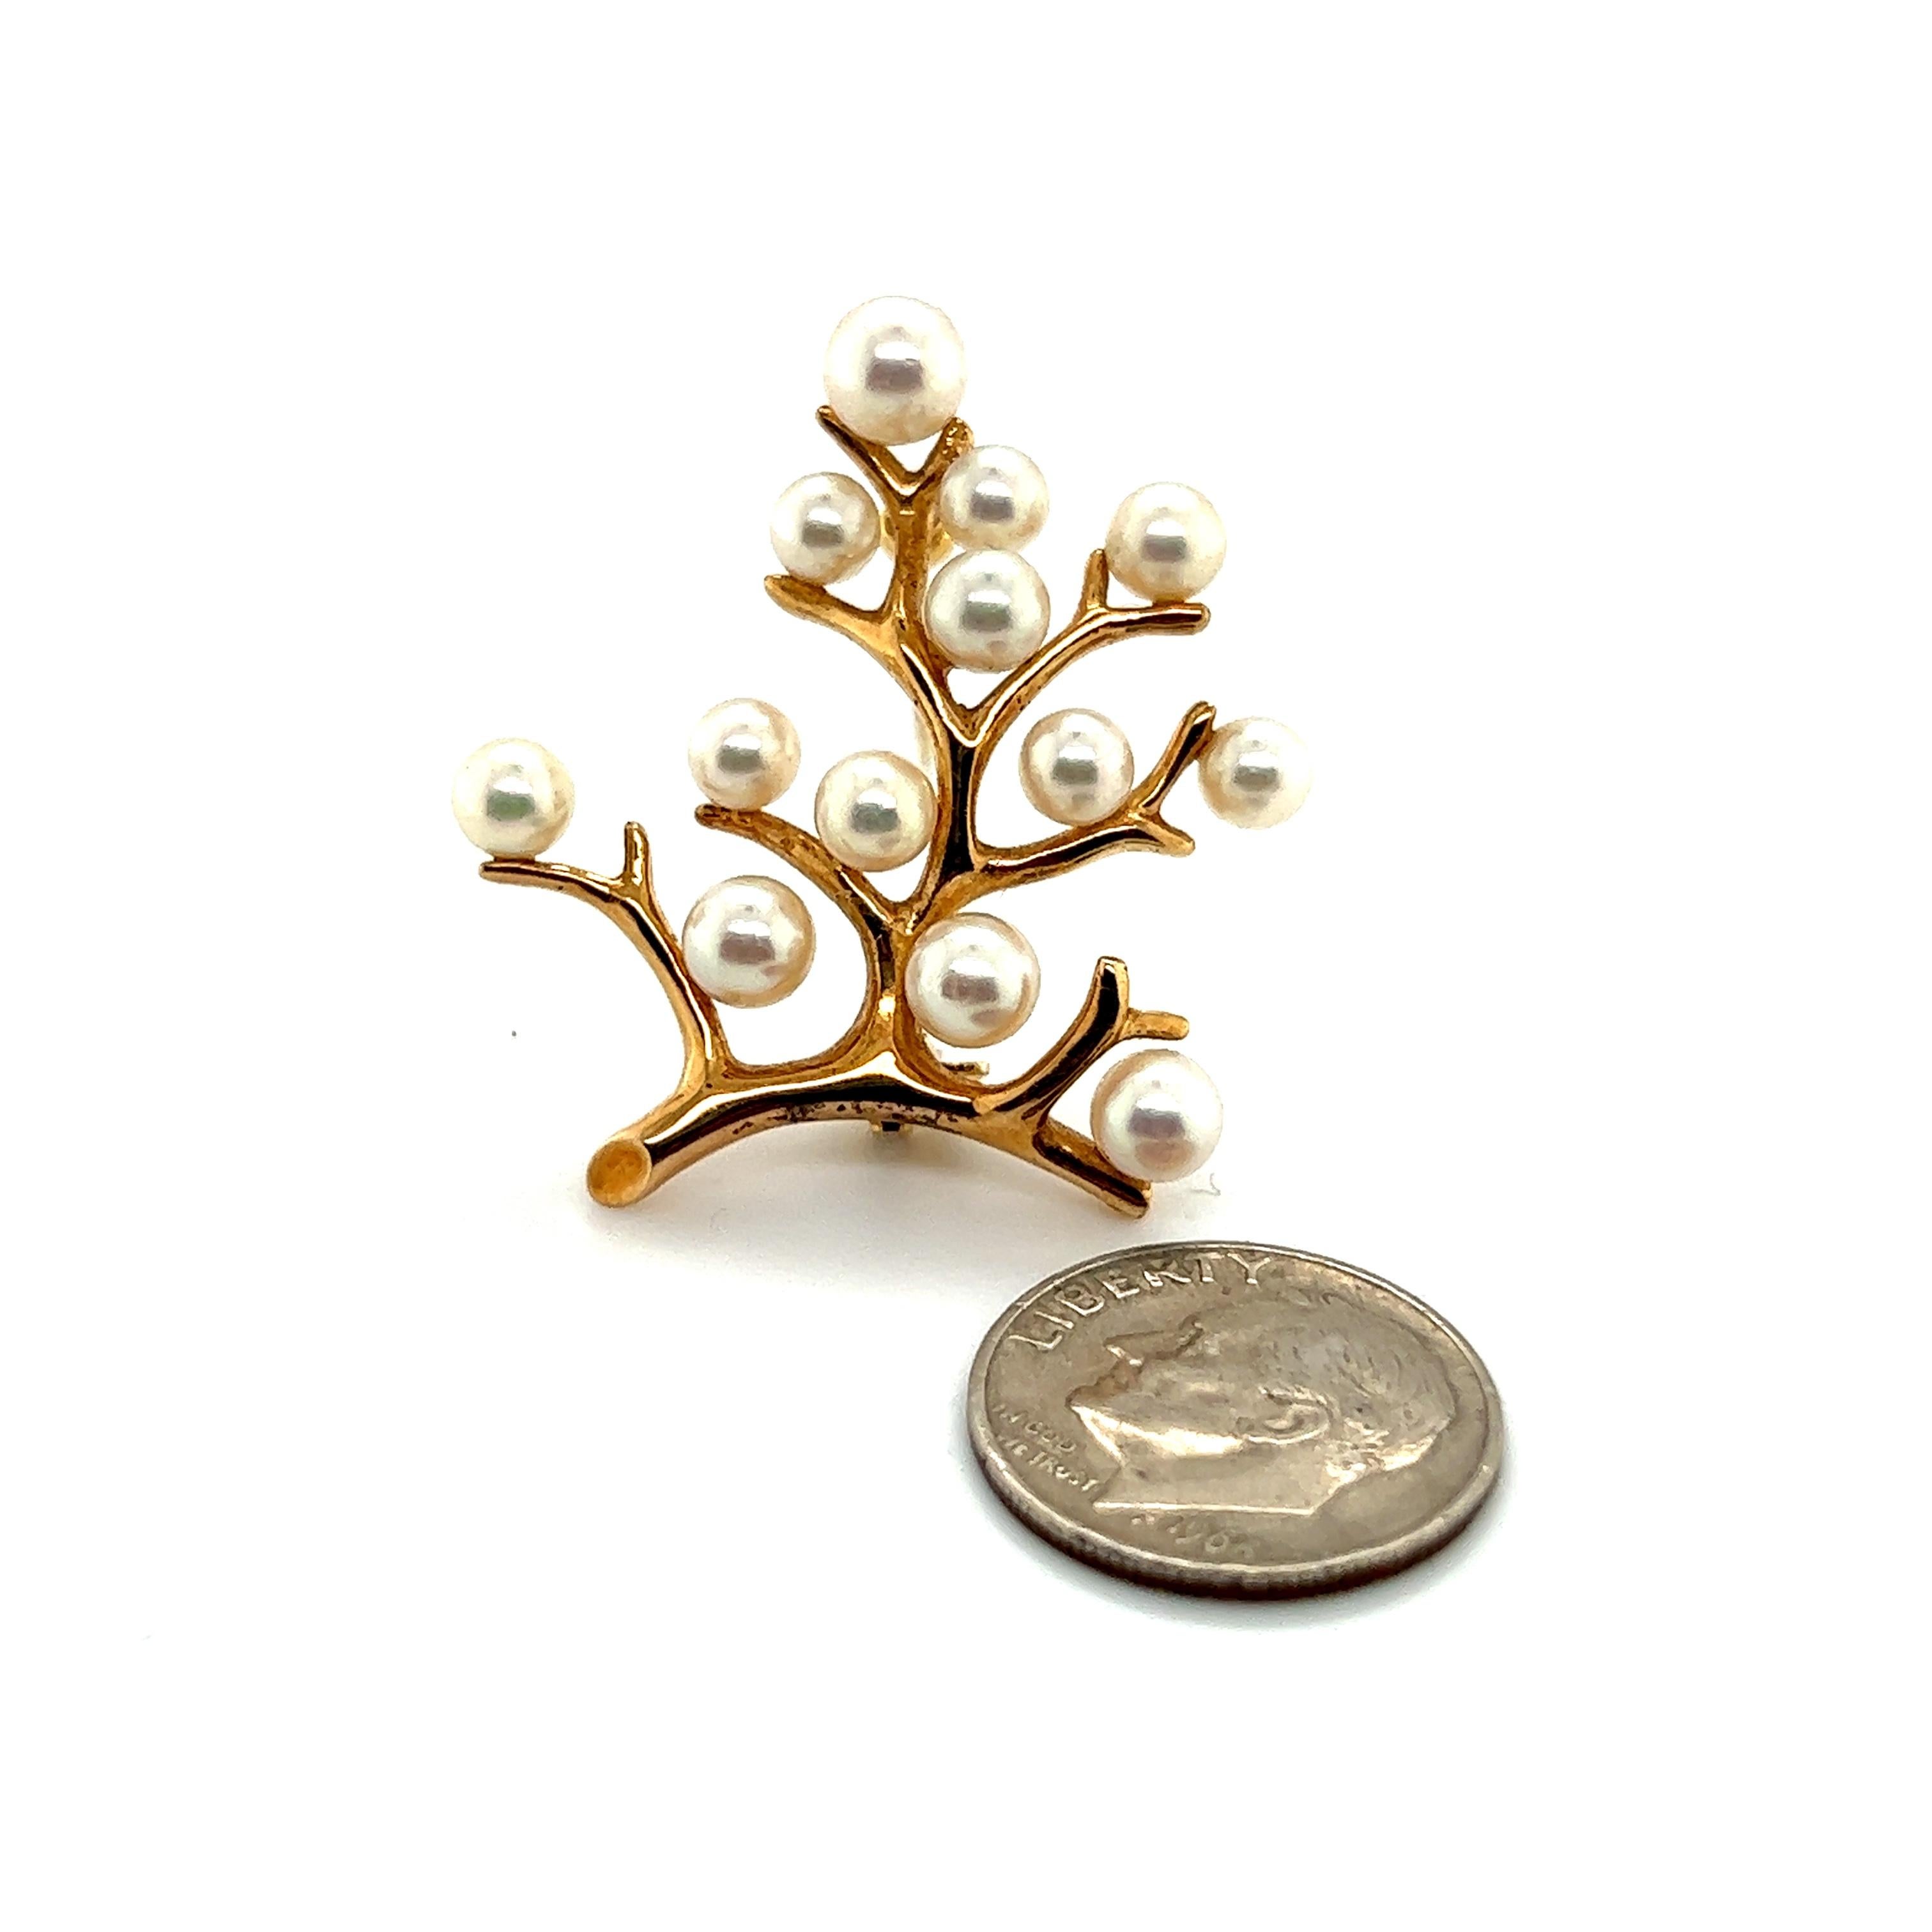 Mikimoto Estate Akoya Pearl Tree of Life Brooch 14k Gold M317

This elegant Authentic Mikimoto 14k Gold brooch has 13 Saltwater Akoya Cultured Pearls and has a weight of 6 grams.

TRUSTED SELLER SINCE 2002

PLEASE SEE OUR HUNDREDS OF POSITIVE